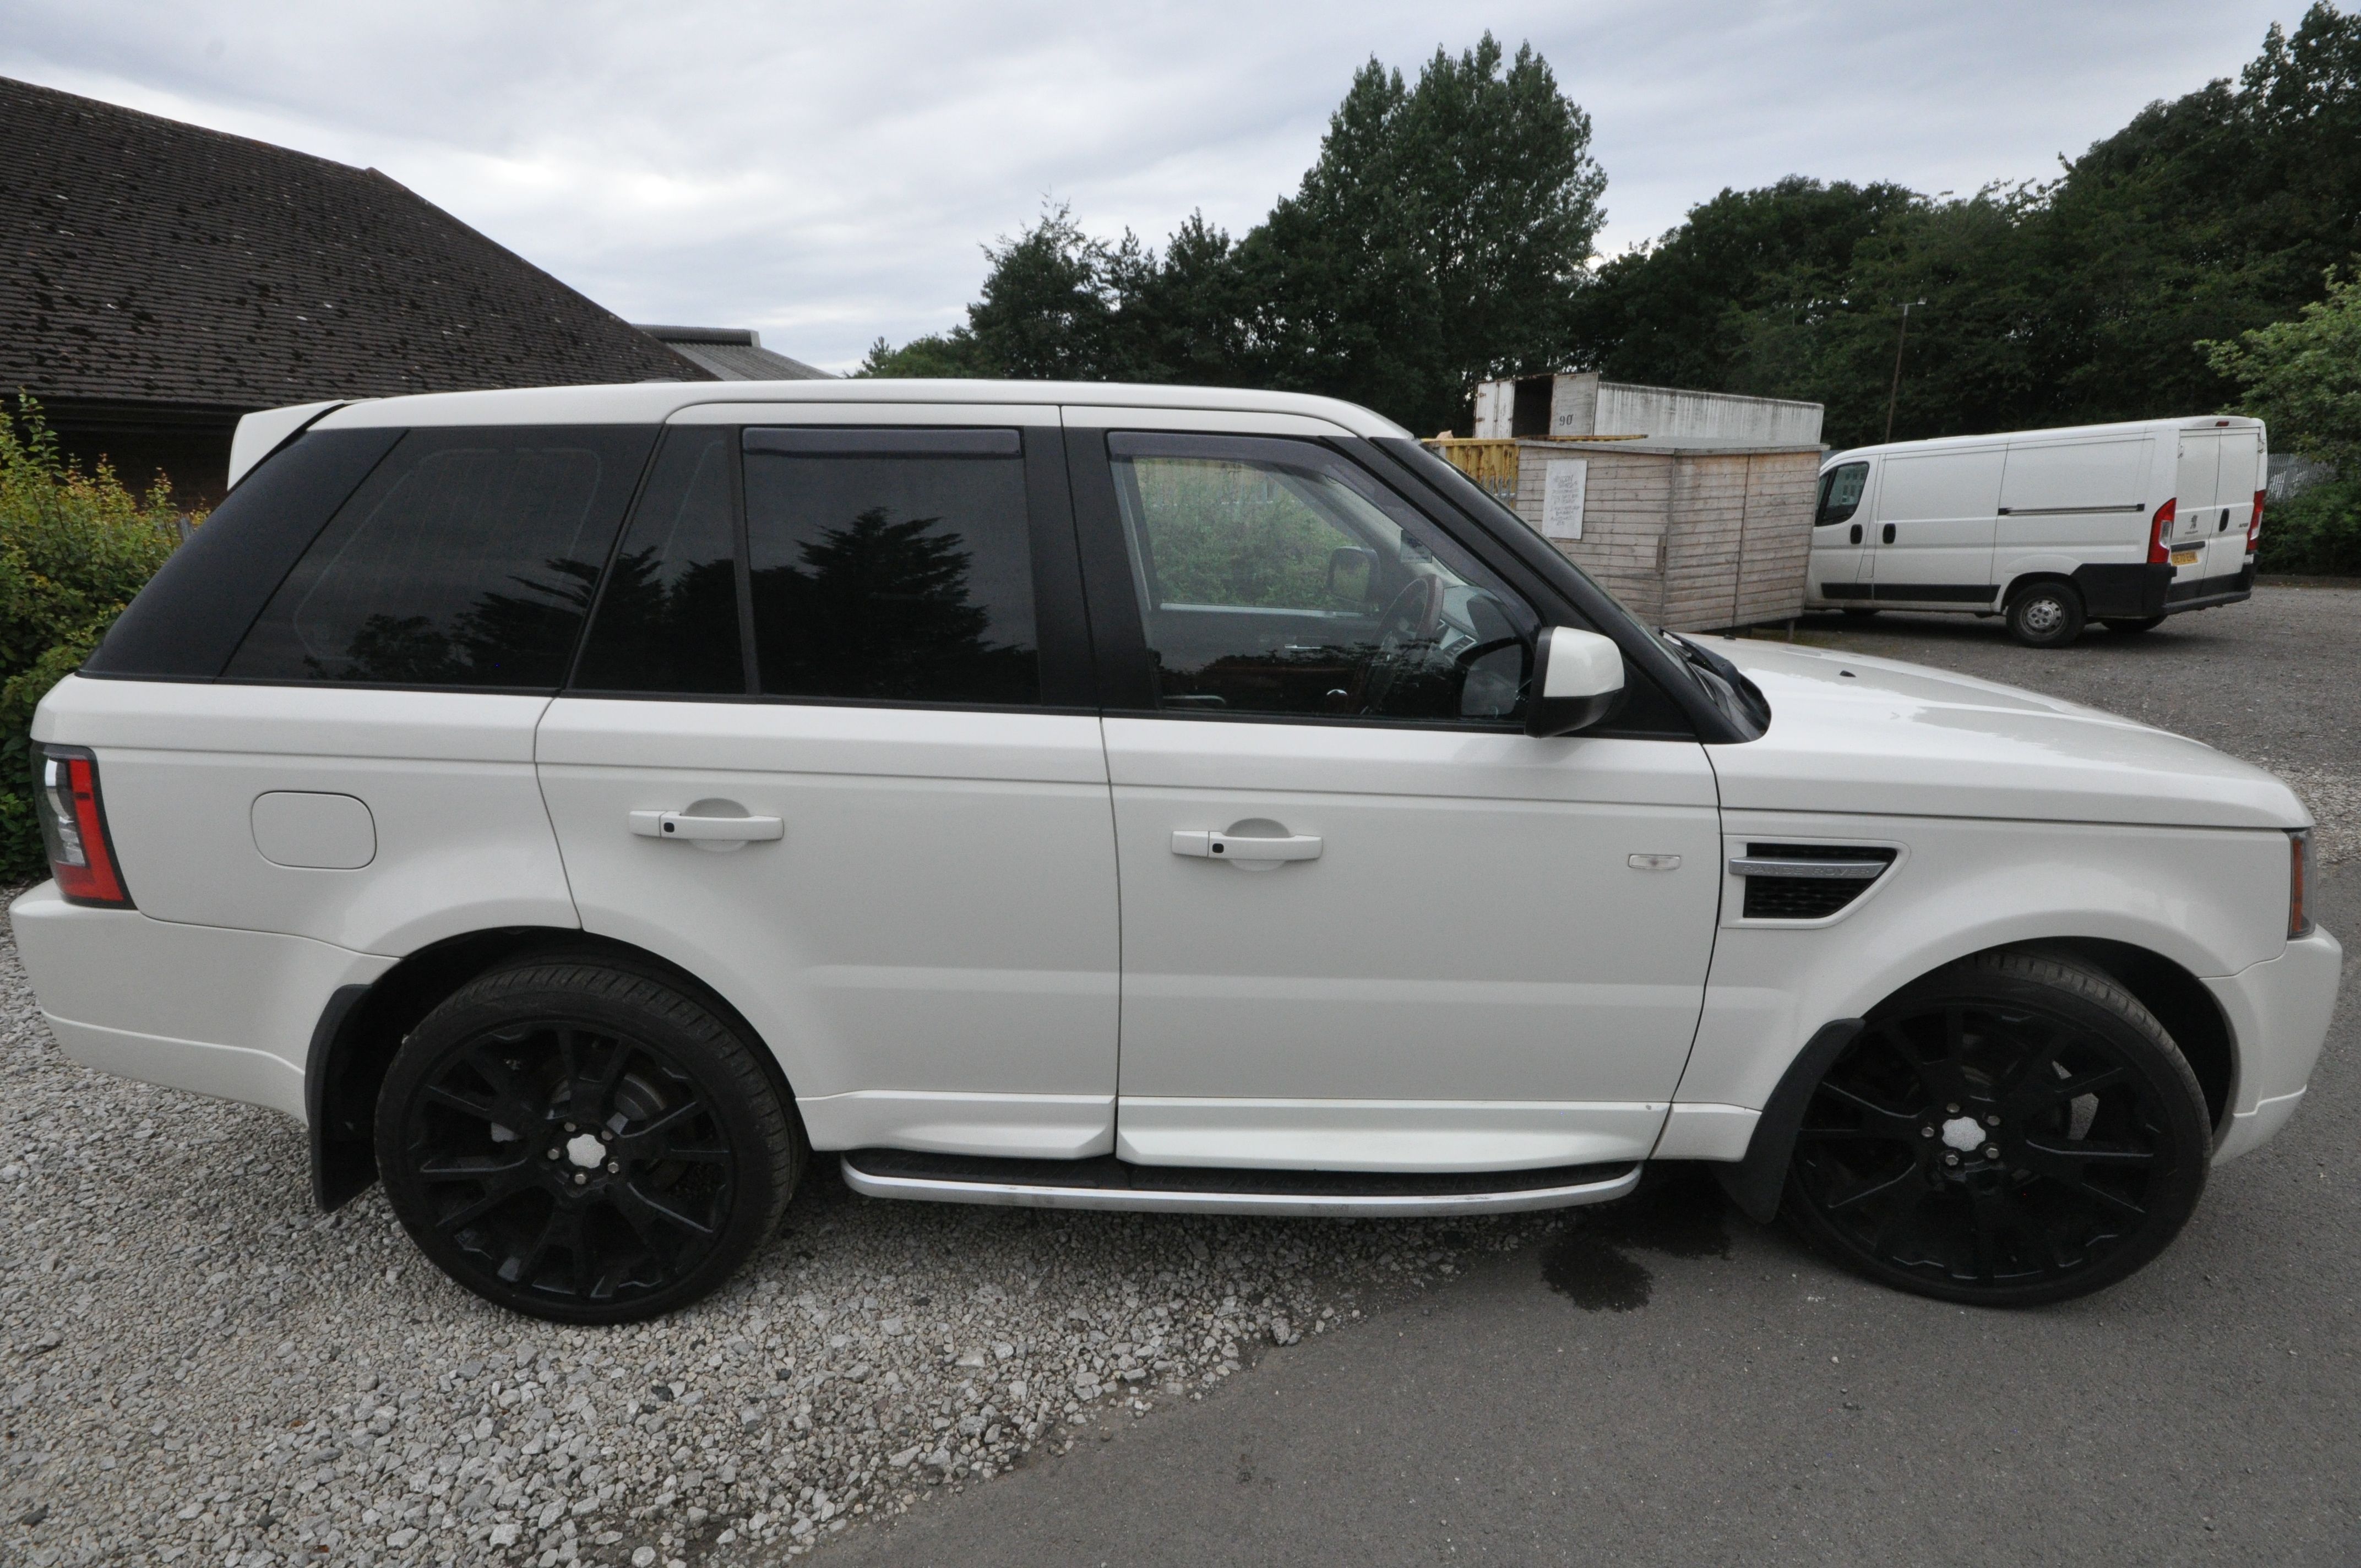 A 2010 RANGE ROVER SPORT - K9 OBP - This Range Rover Sport 3.6 TDV8 Autobiography Sport with - Image 2 of 9